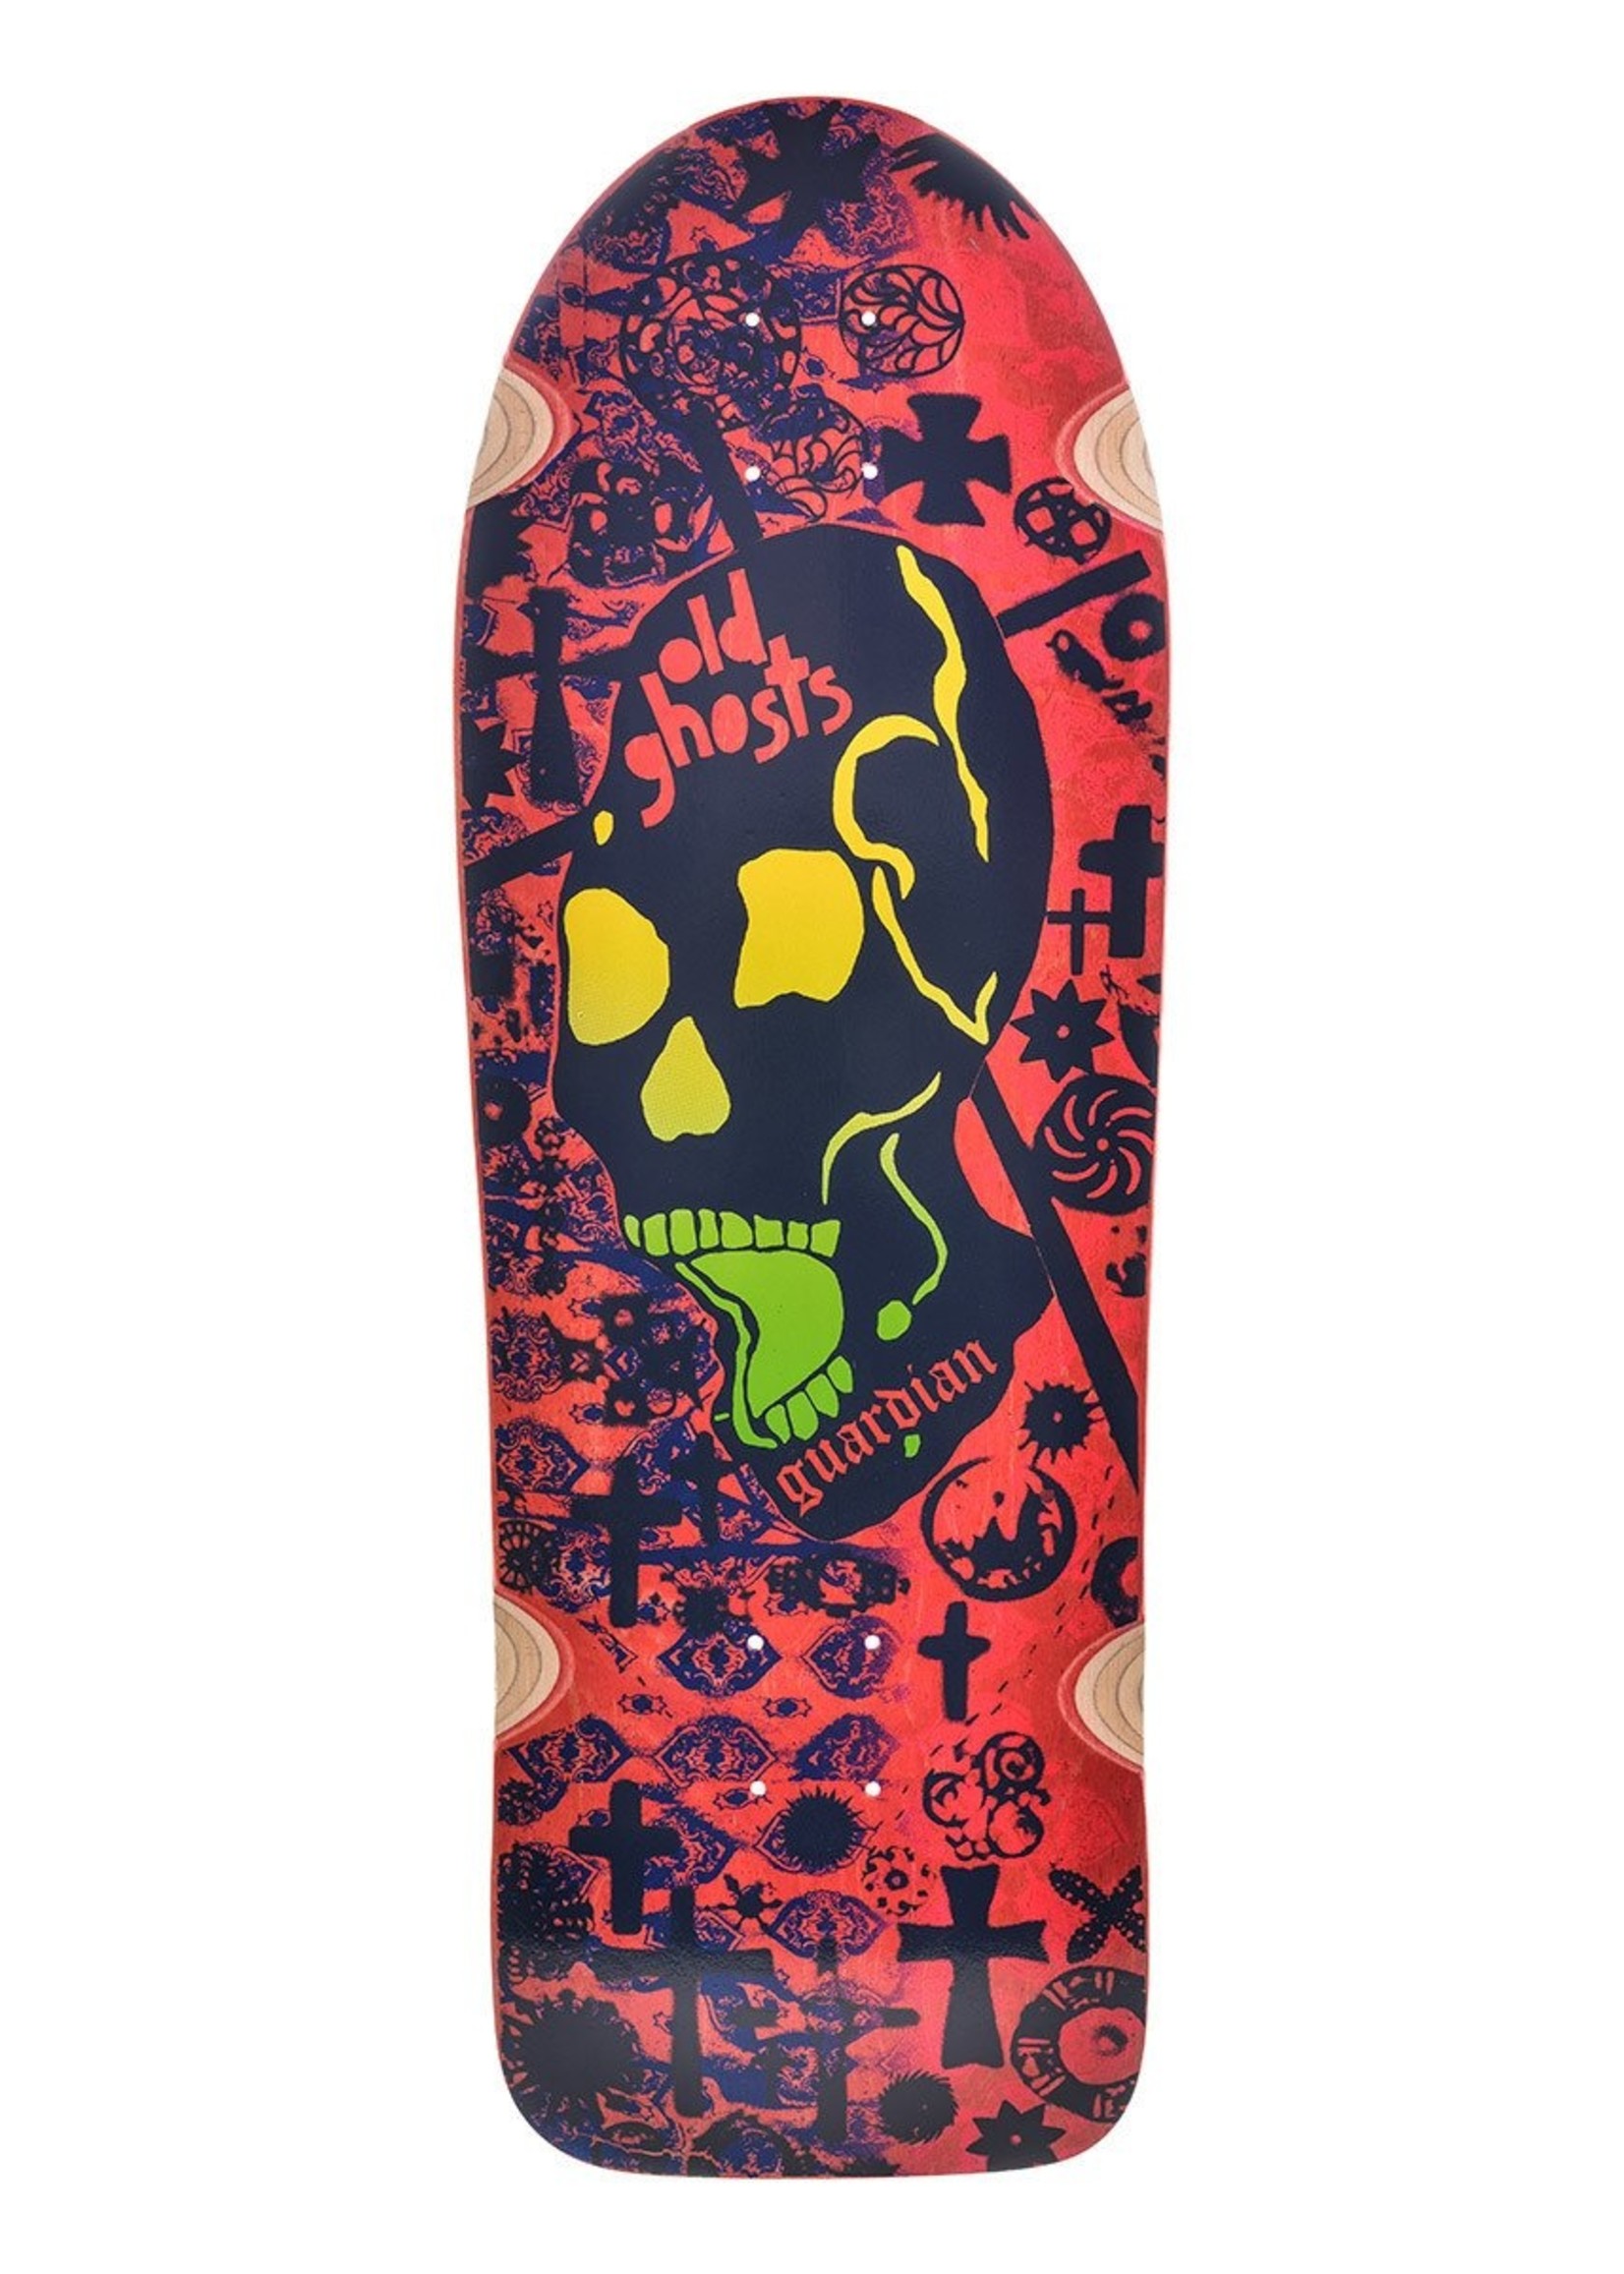 Vision Vision Old Ghost Deck 10"x31.75" Red Stain